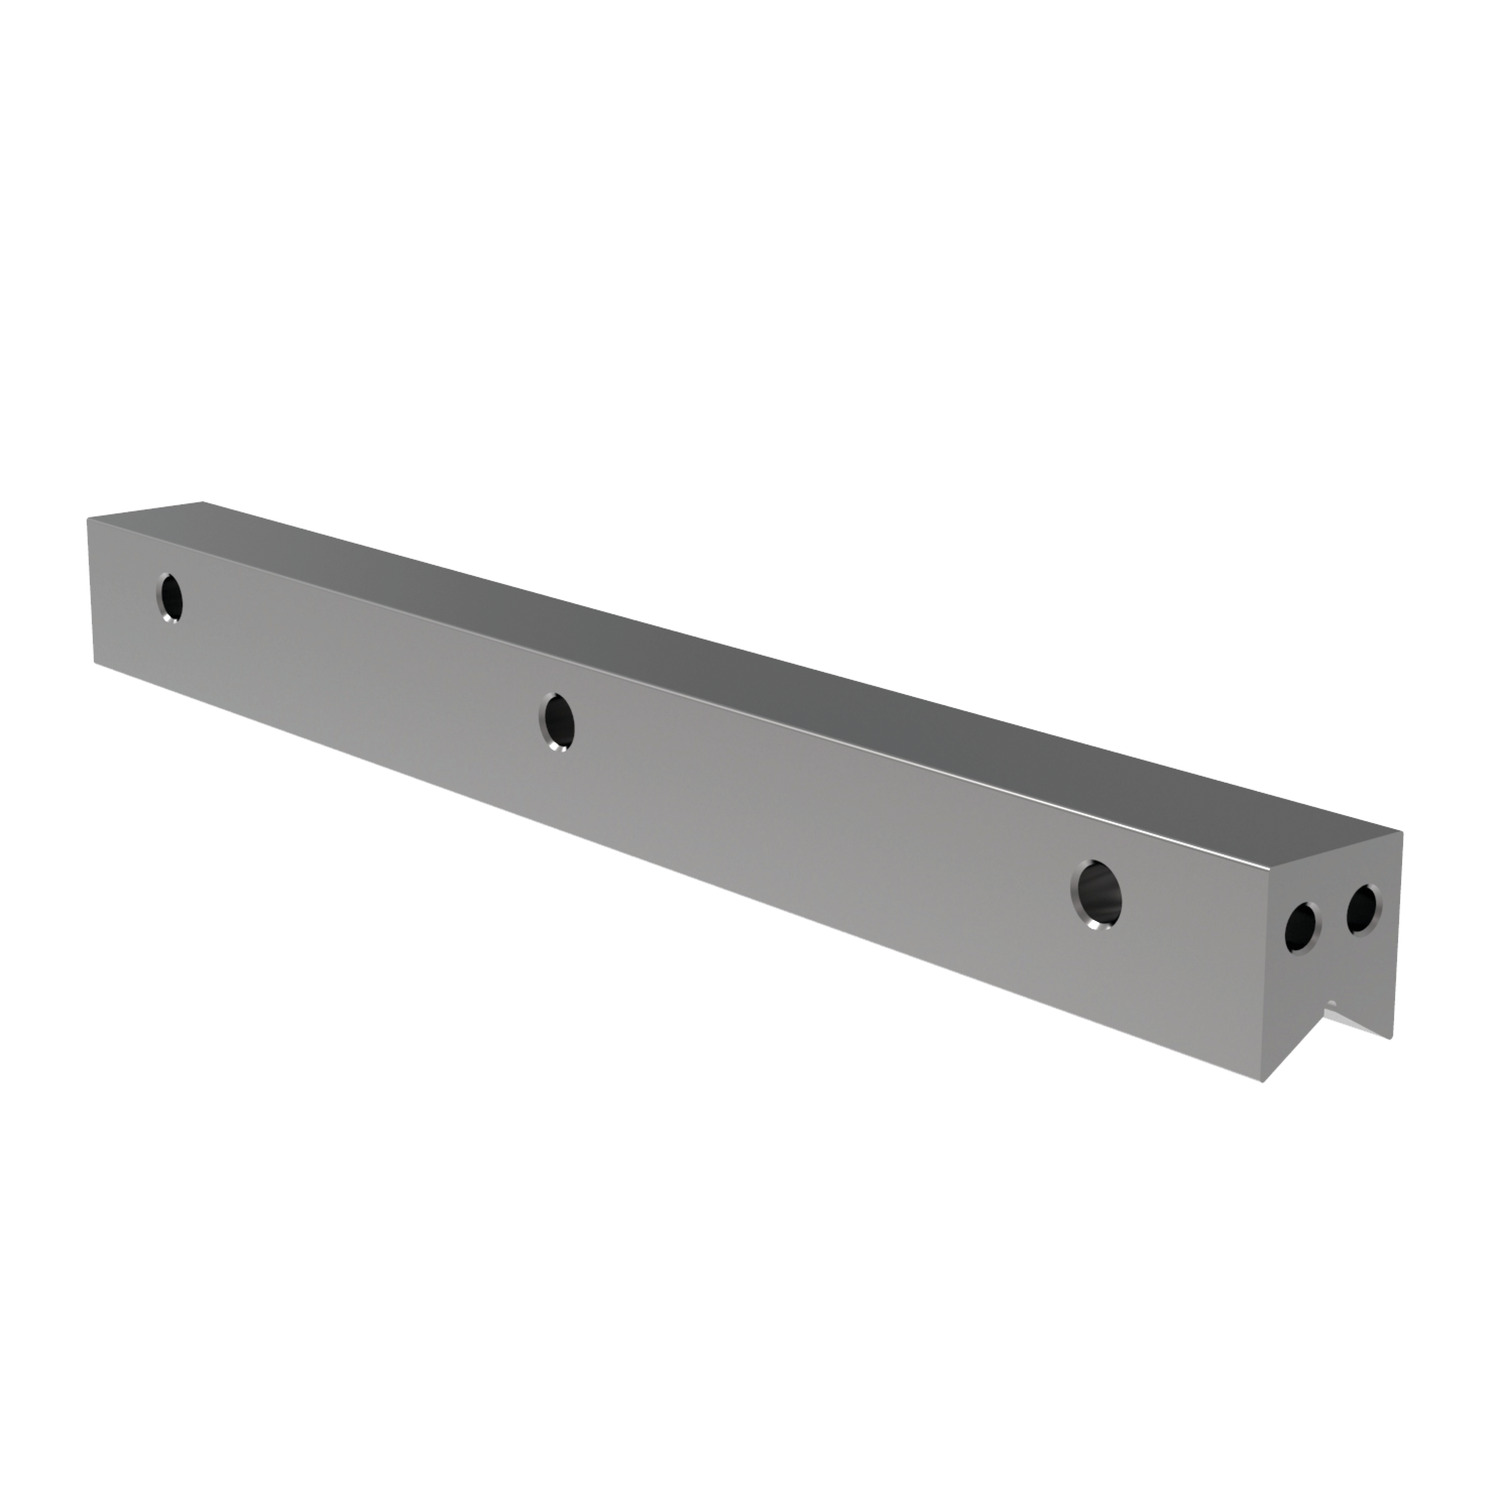 Needle Roller Rail Sets - M rail Normally supplied in set of 2 (one M and one V) with needle rollers.